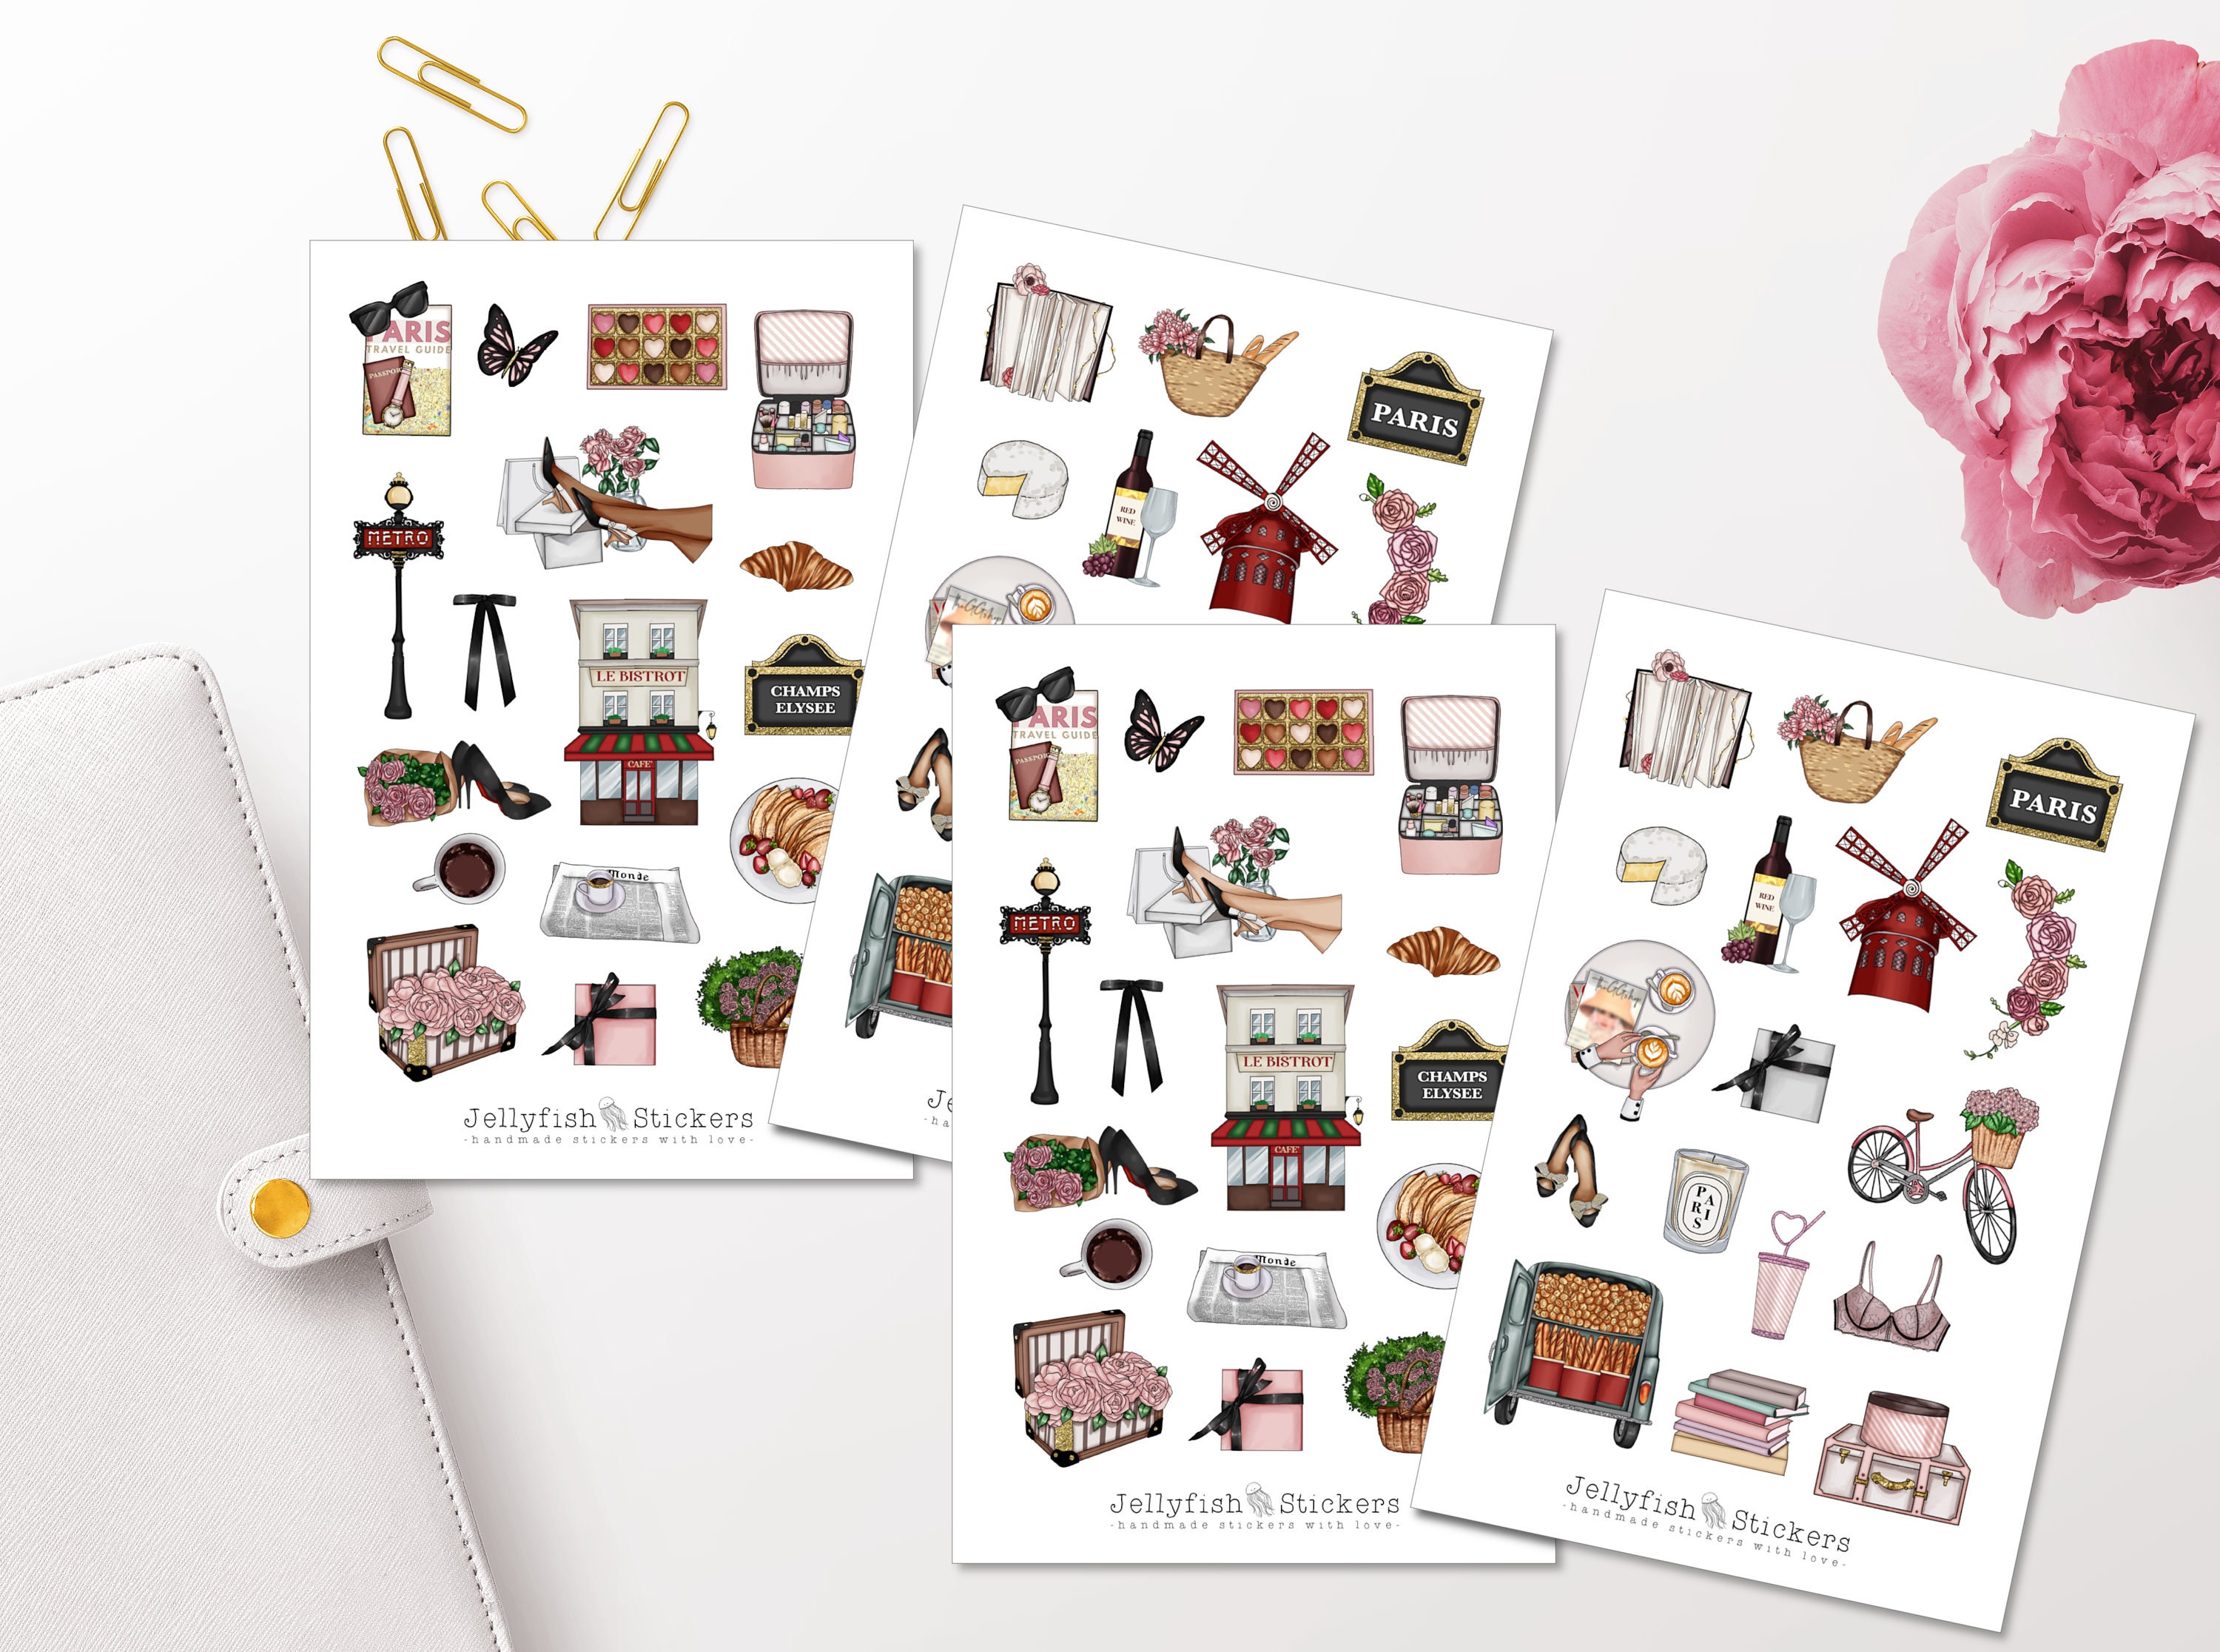 Tea Sticker Set - Journal Stickers, Planner Stickers, Baking, Kitchen,  Coffee, Cafe, Recipes, Cookbook, Sweets, Pastries, Macarons, Vintage